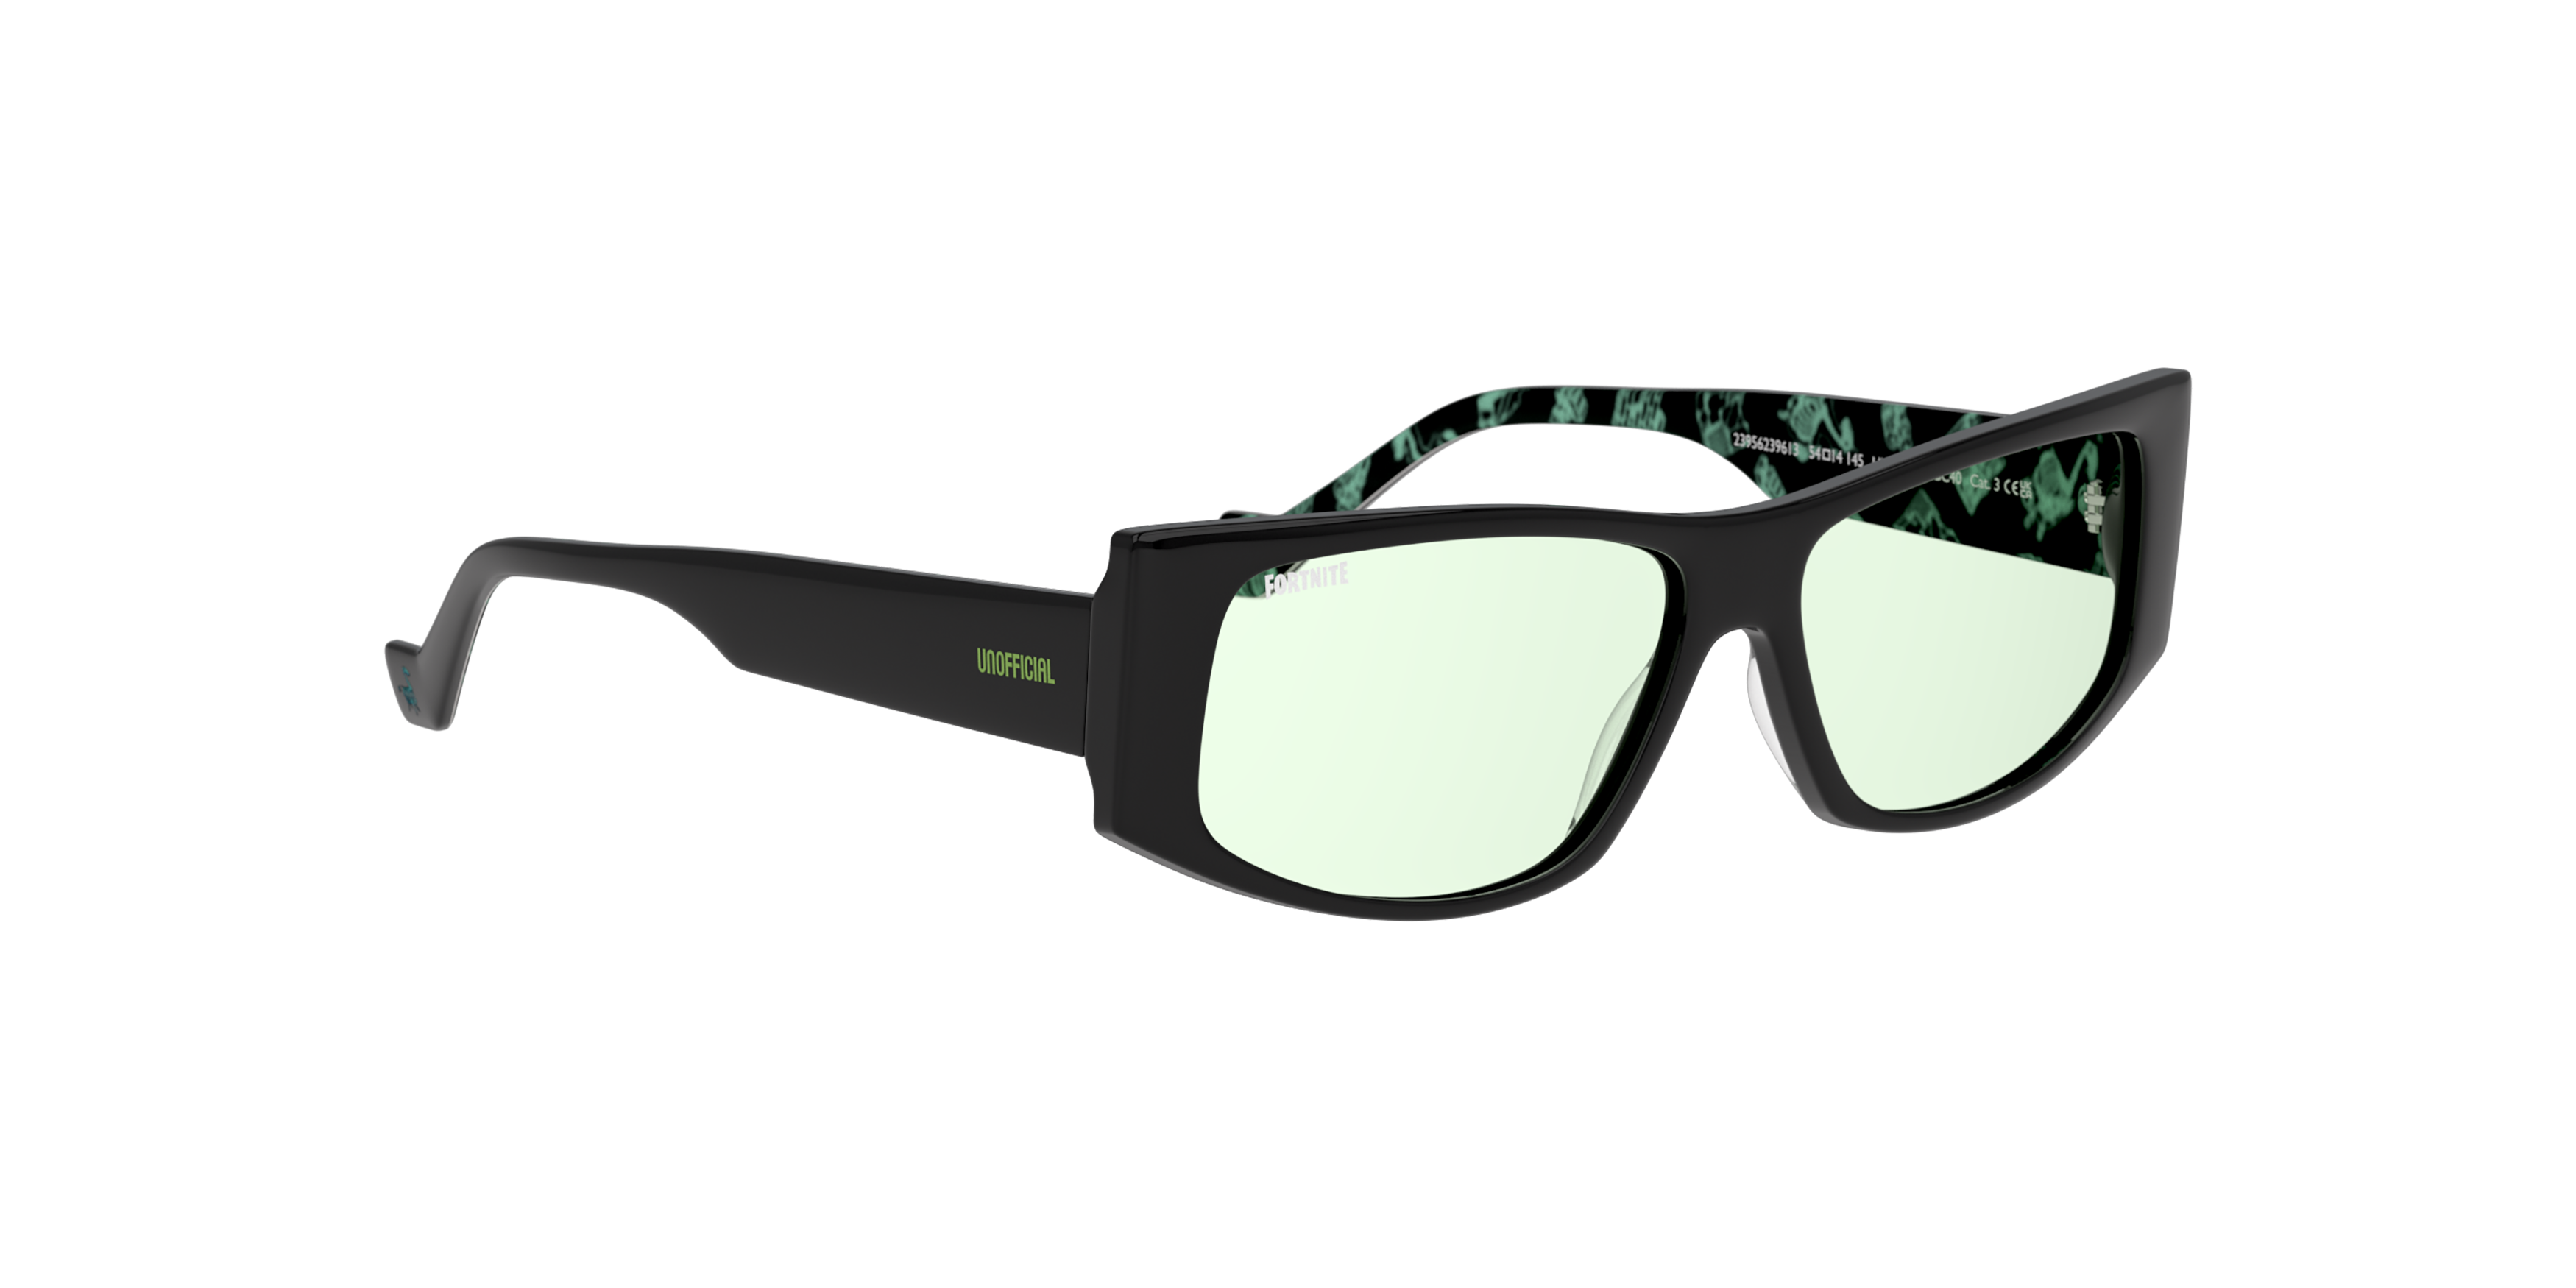 Angle_Right01 Fortnite with Unofficial UNSU0145 Sunglasses Green / Black